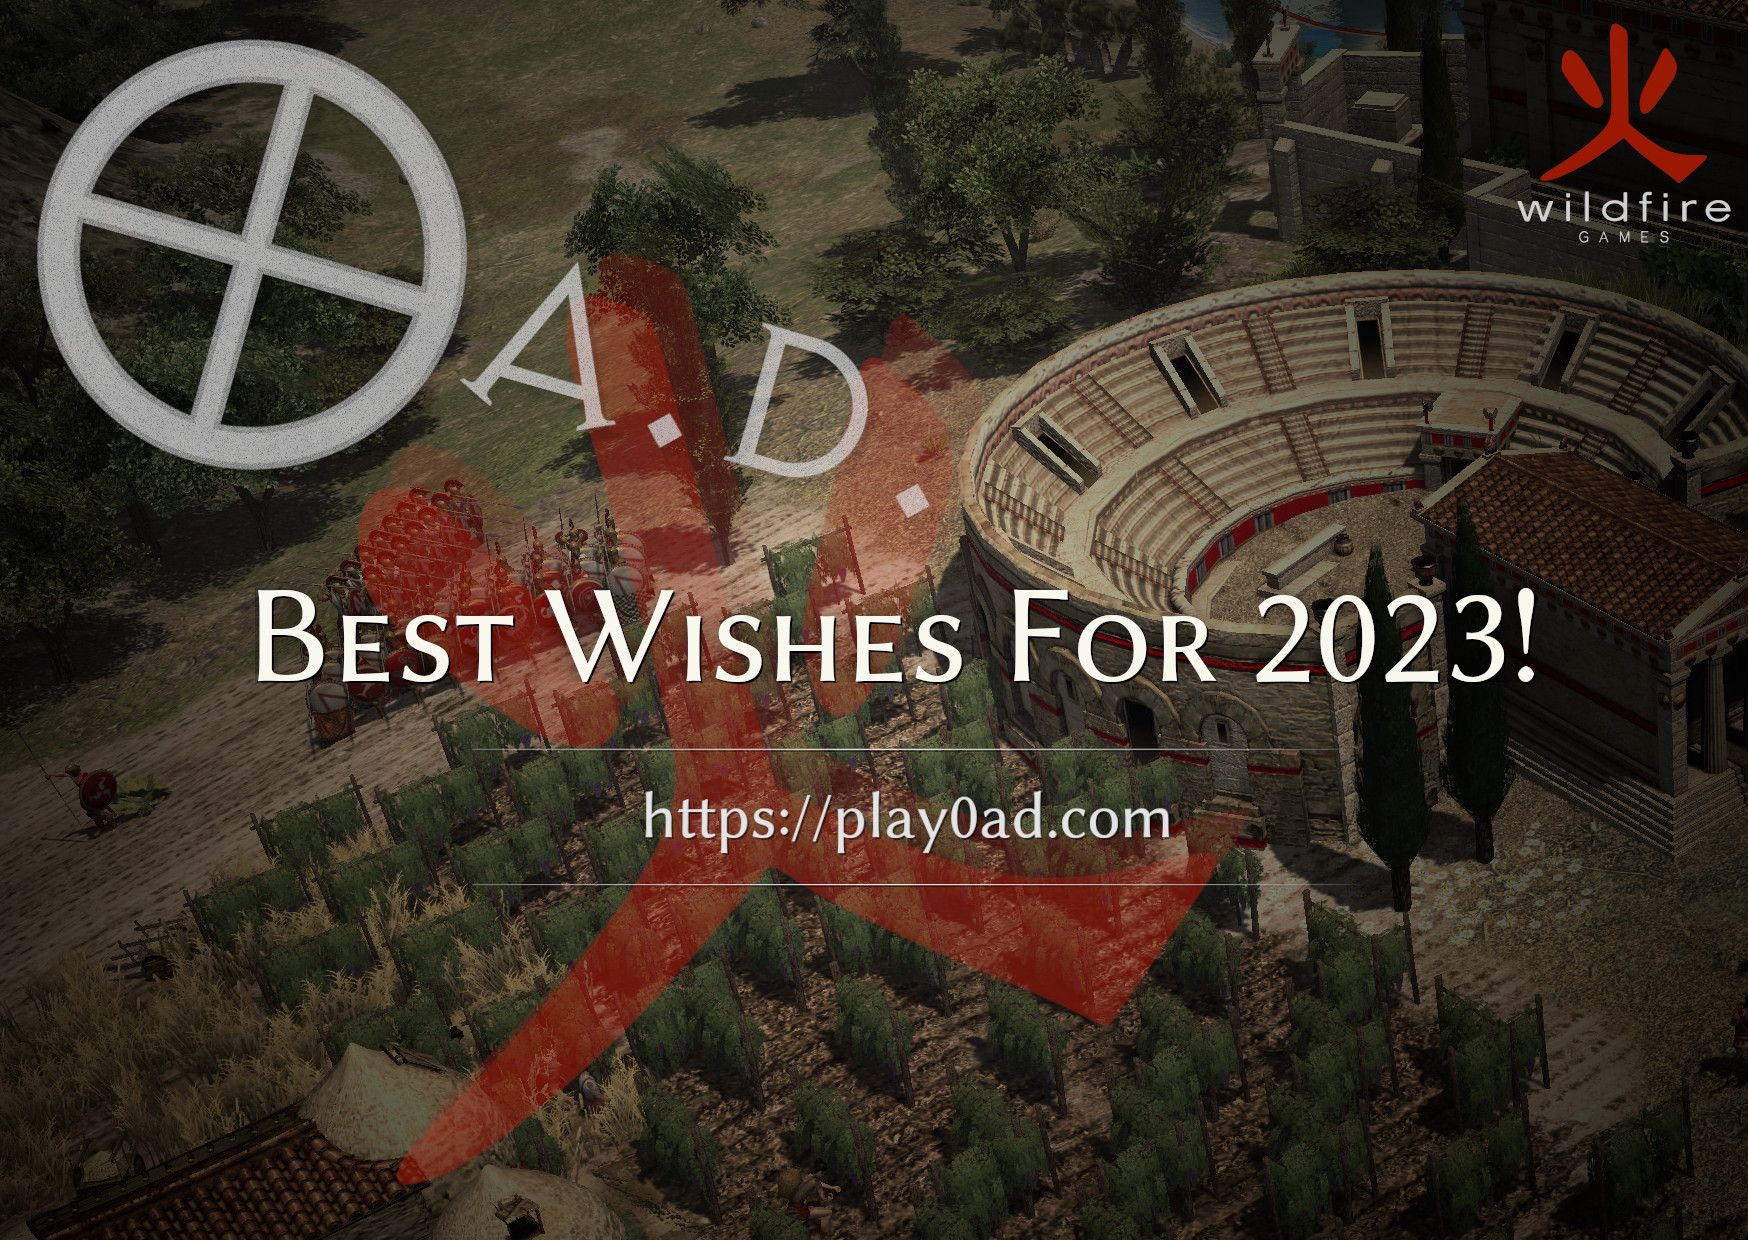 Best wishes for 2023 over a grape fruit field next to a greek theater with the wildfire games logo.